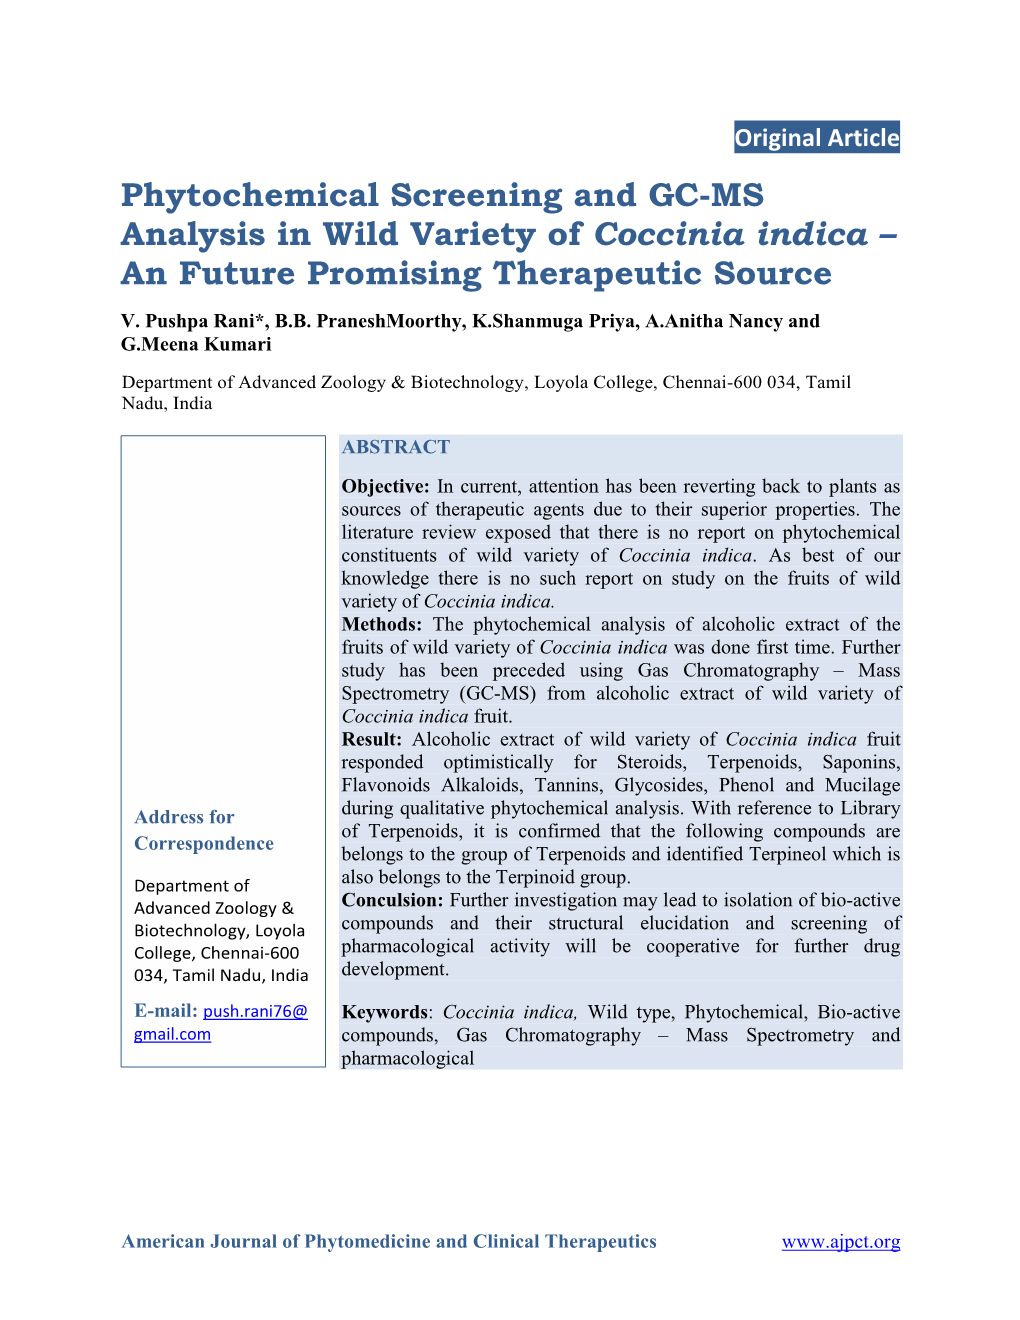 Phytochemical Screening and GC-MS Analysis in Wild Variety of Coccinia Indica – an Future Promising Therapeutic Source V